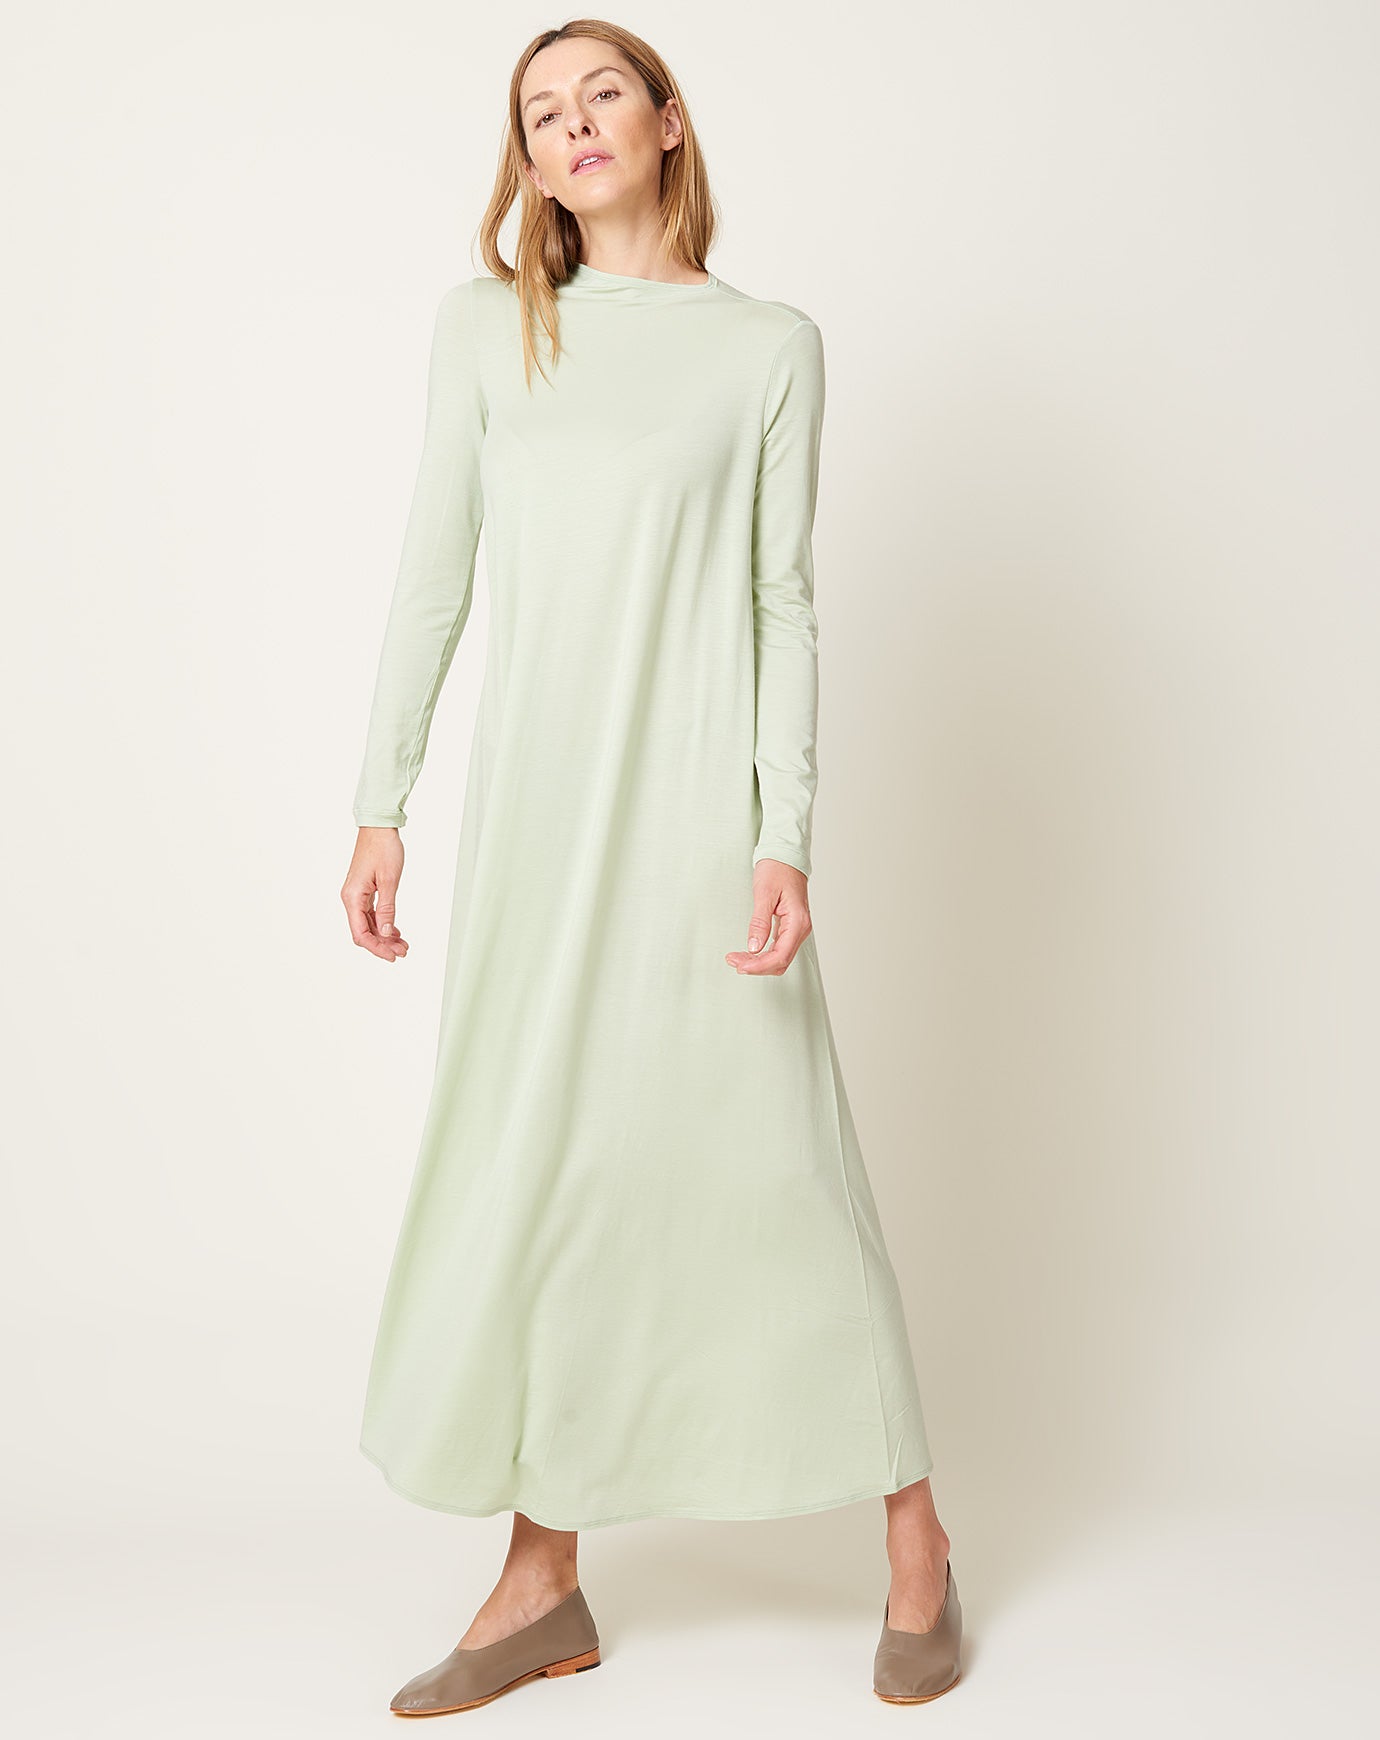 Babaco Relaxed Jersey Dress in Mint